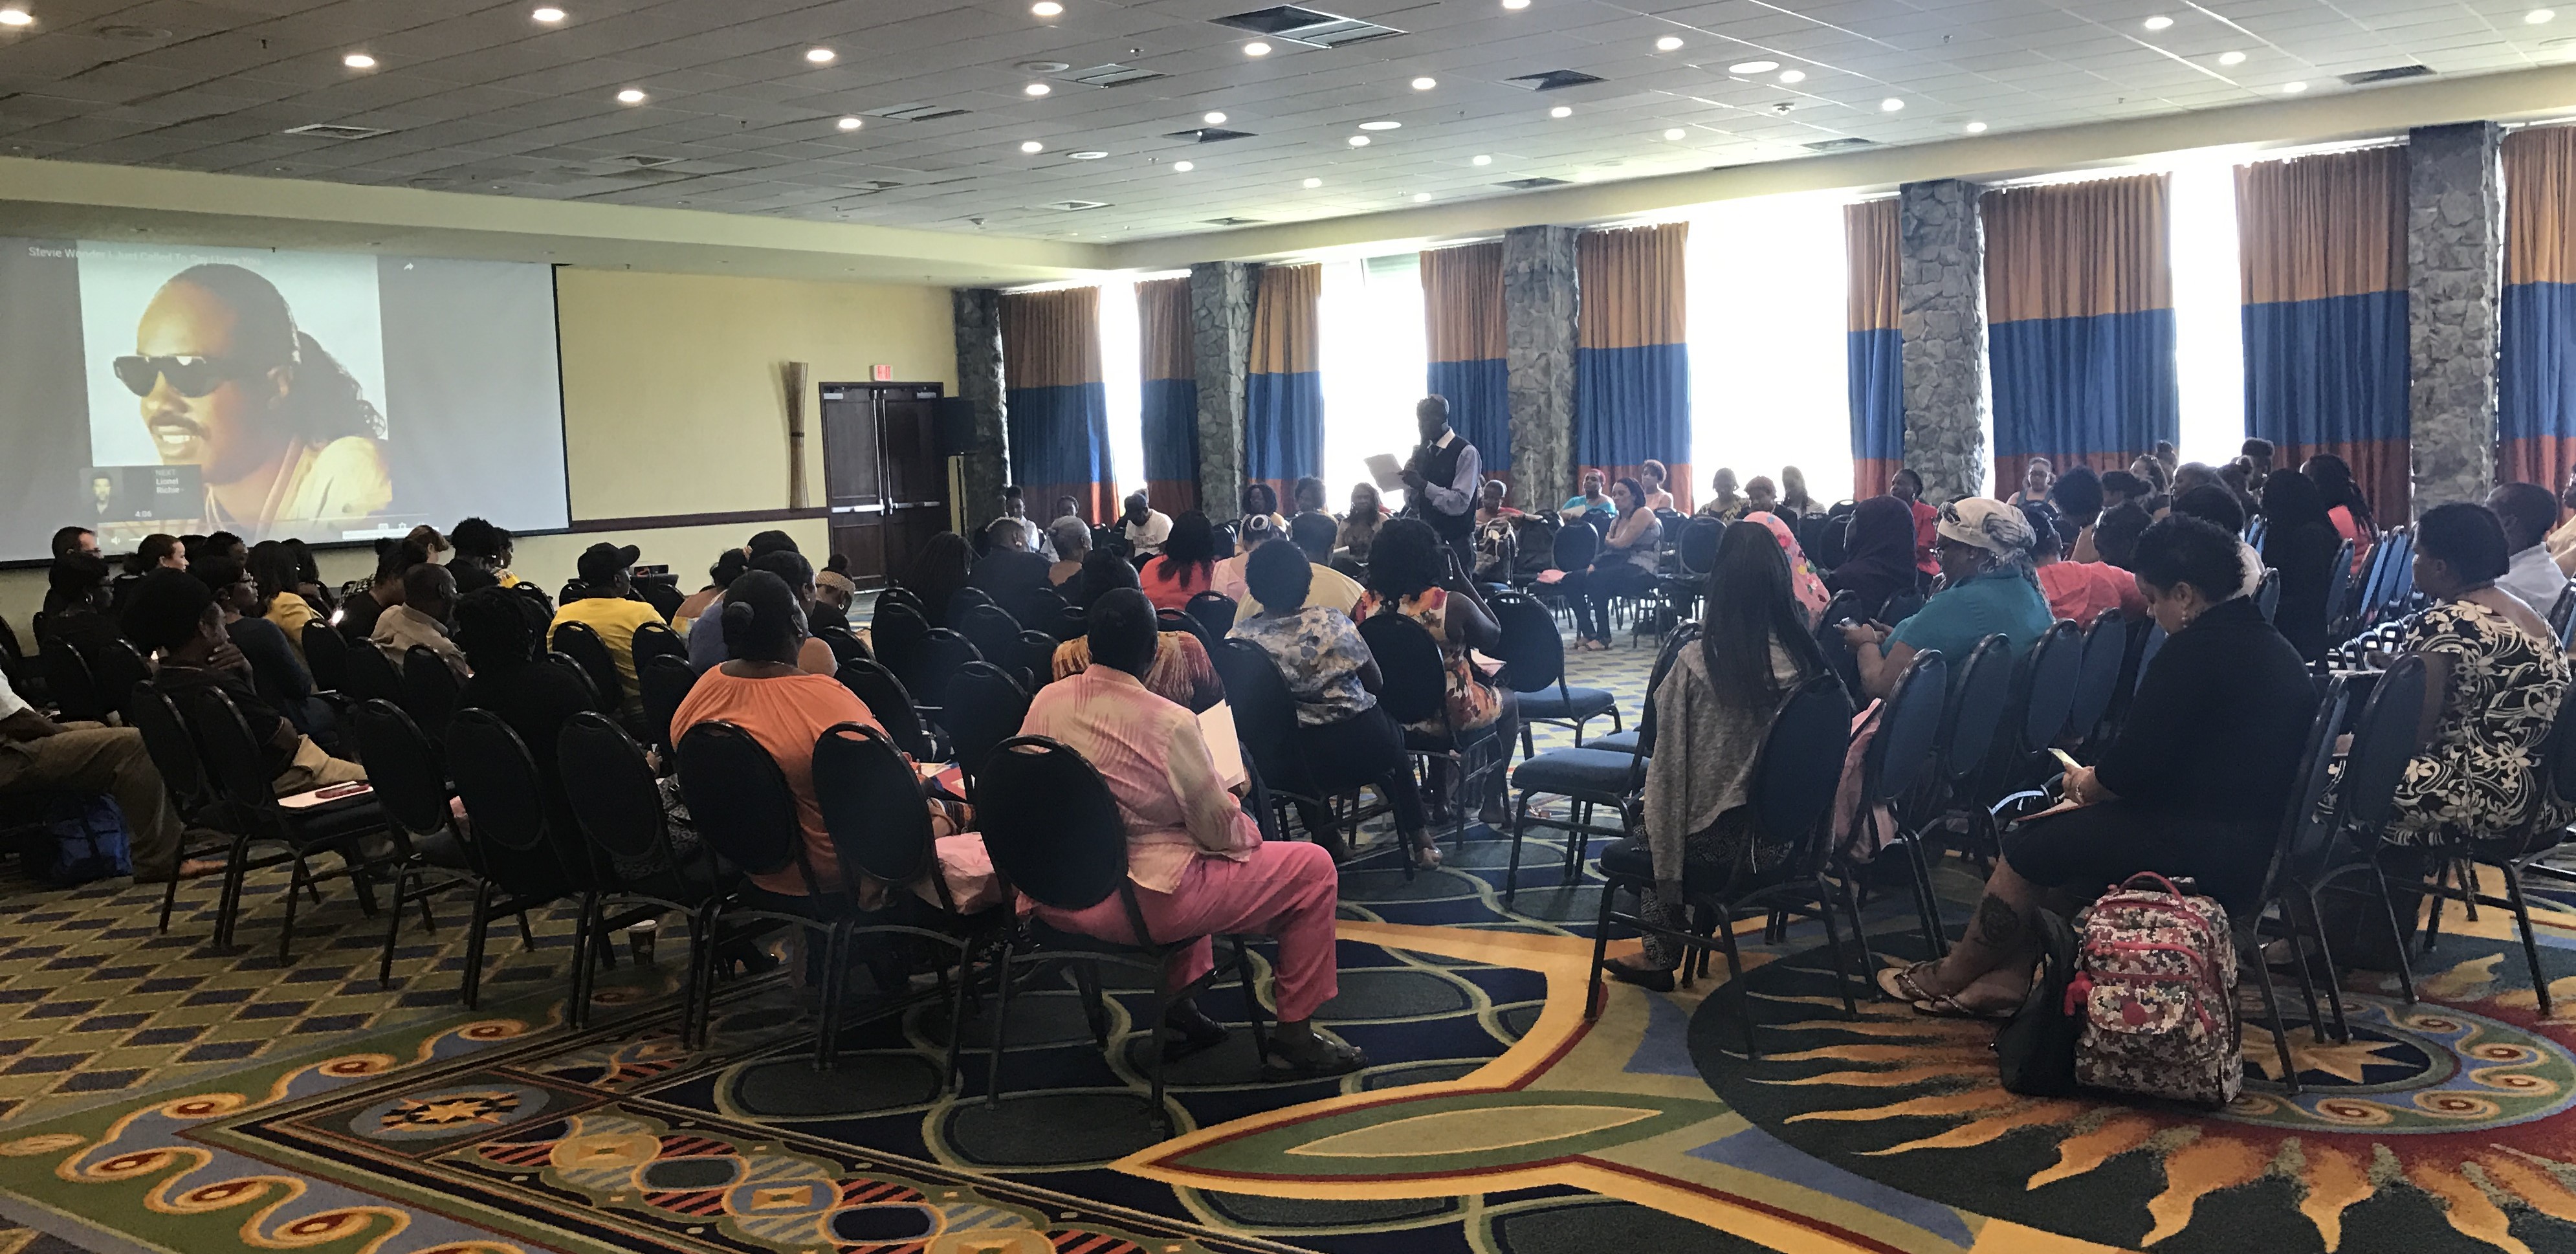 Parent Conference held at Marriott's Frenchman's Reef Beach Resort 